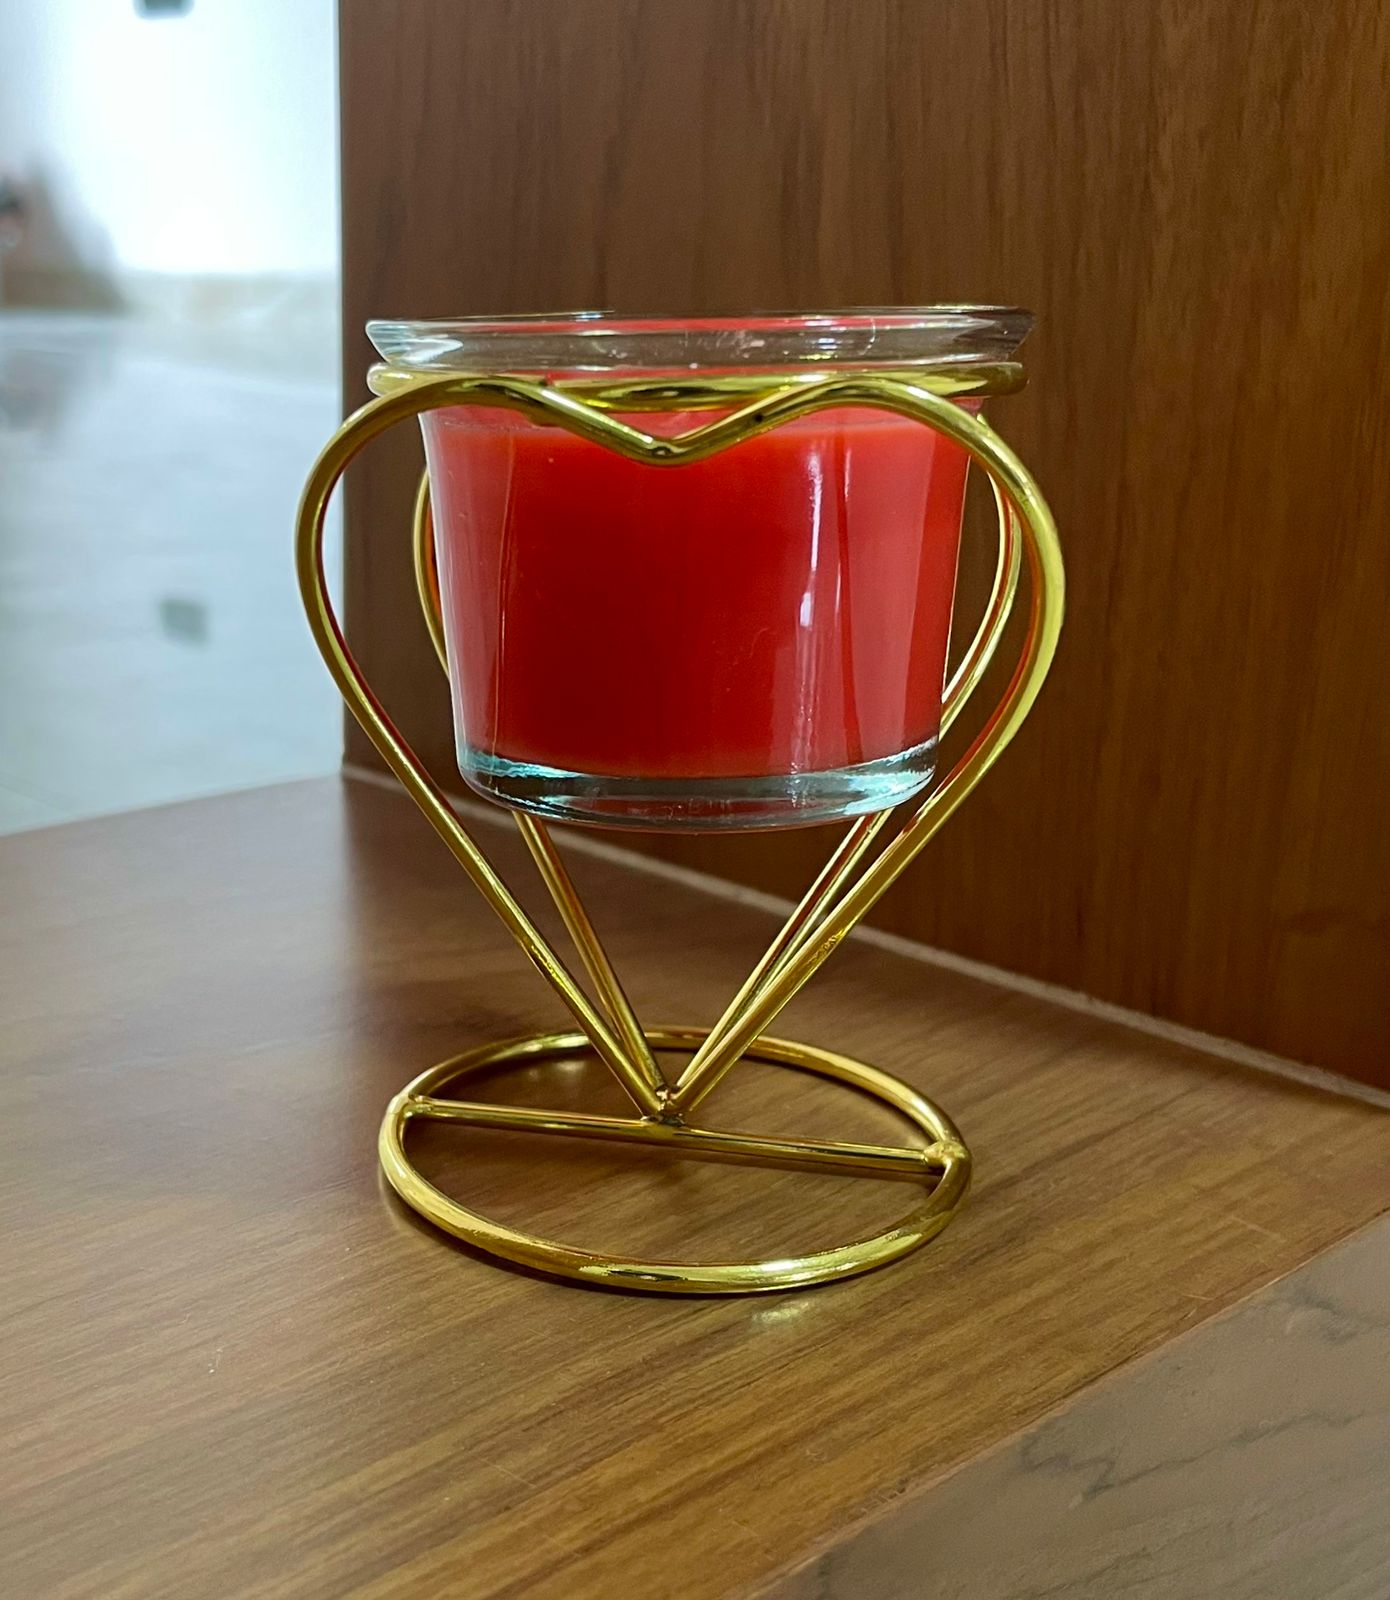 Gold Heart Stand for Rose Scented Red Candle - Decorative Romance